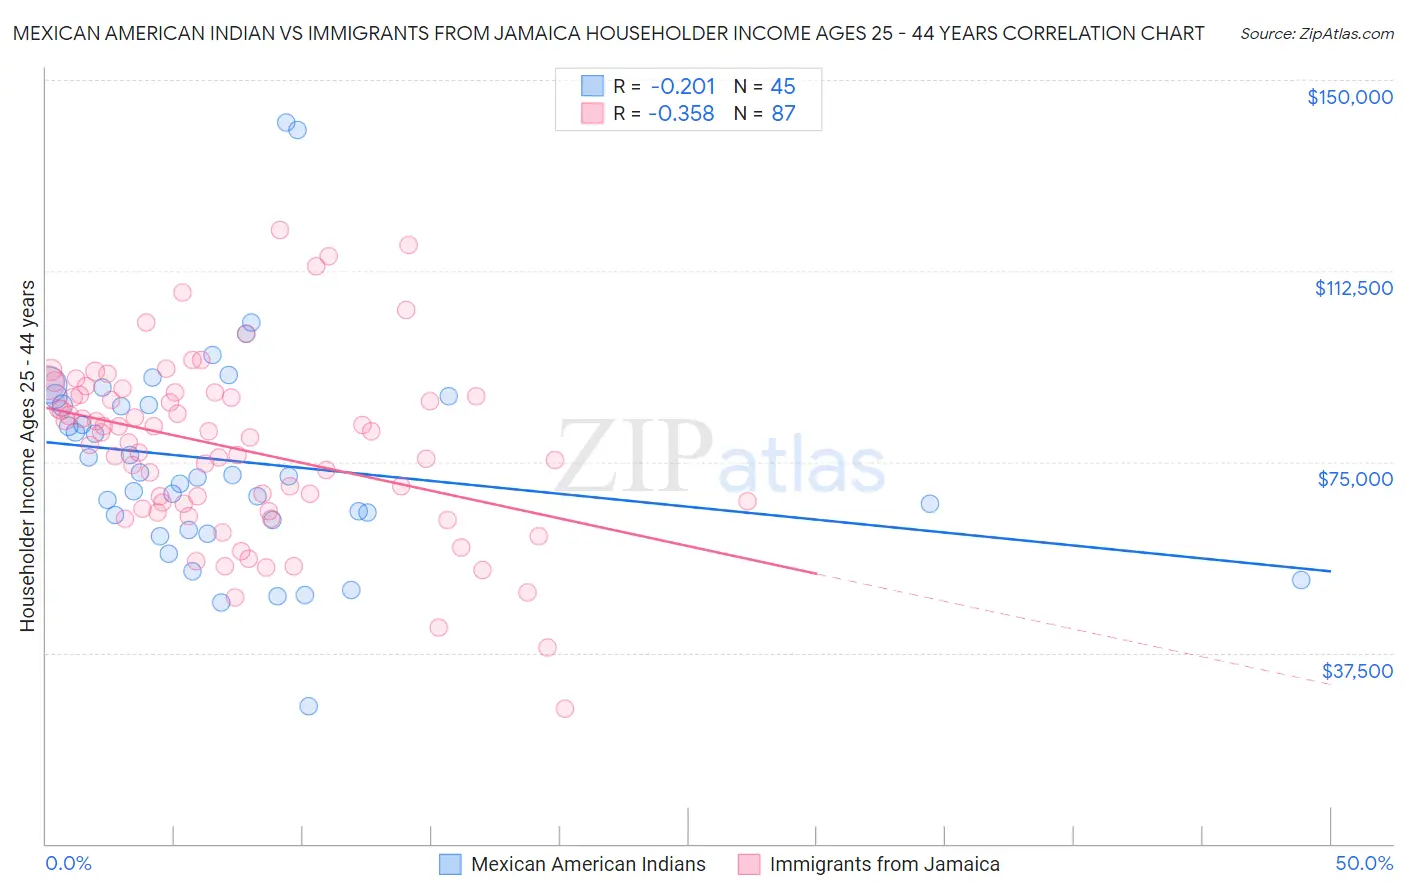 Mexican American Indian vs Immigrants from Jamaica Householder Income Ages 25 - 44 years